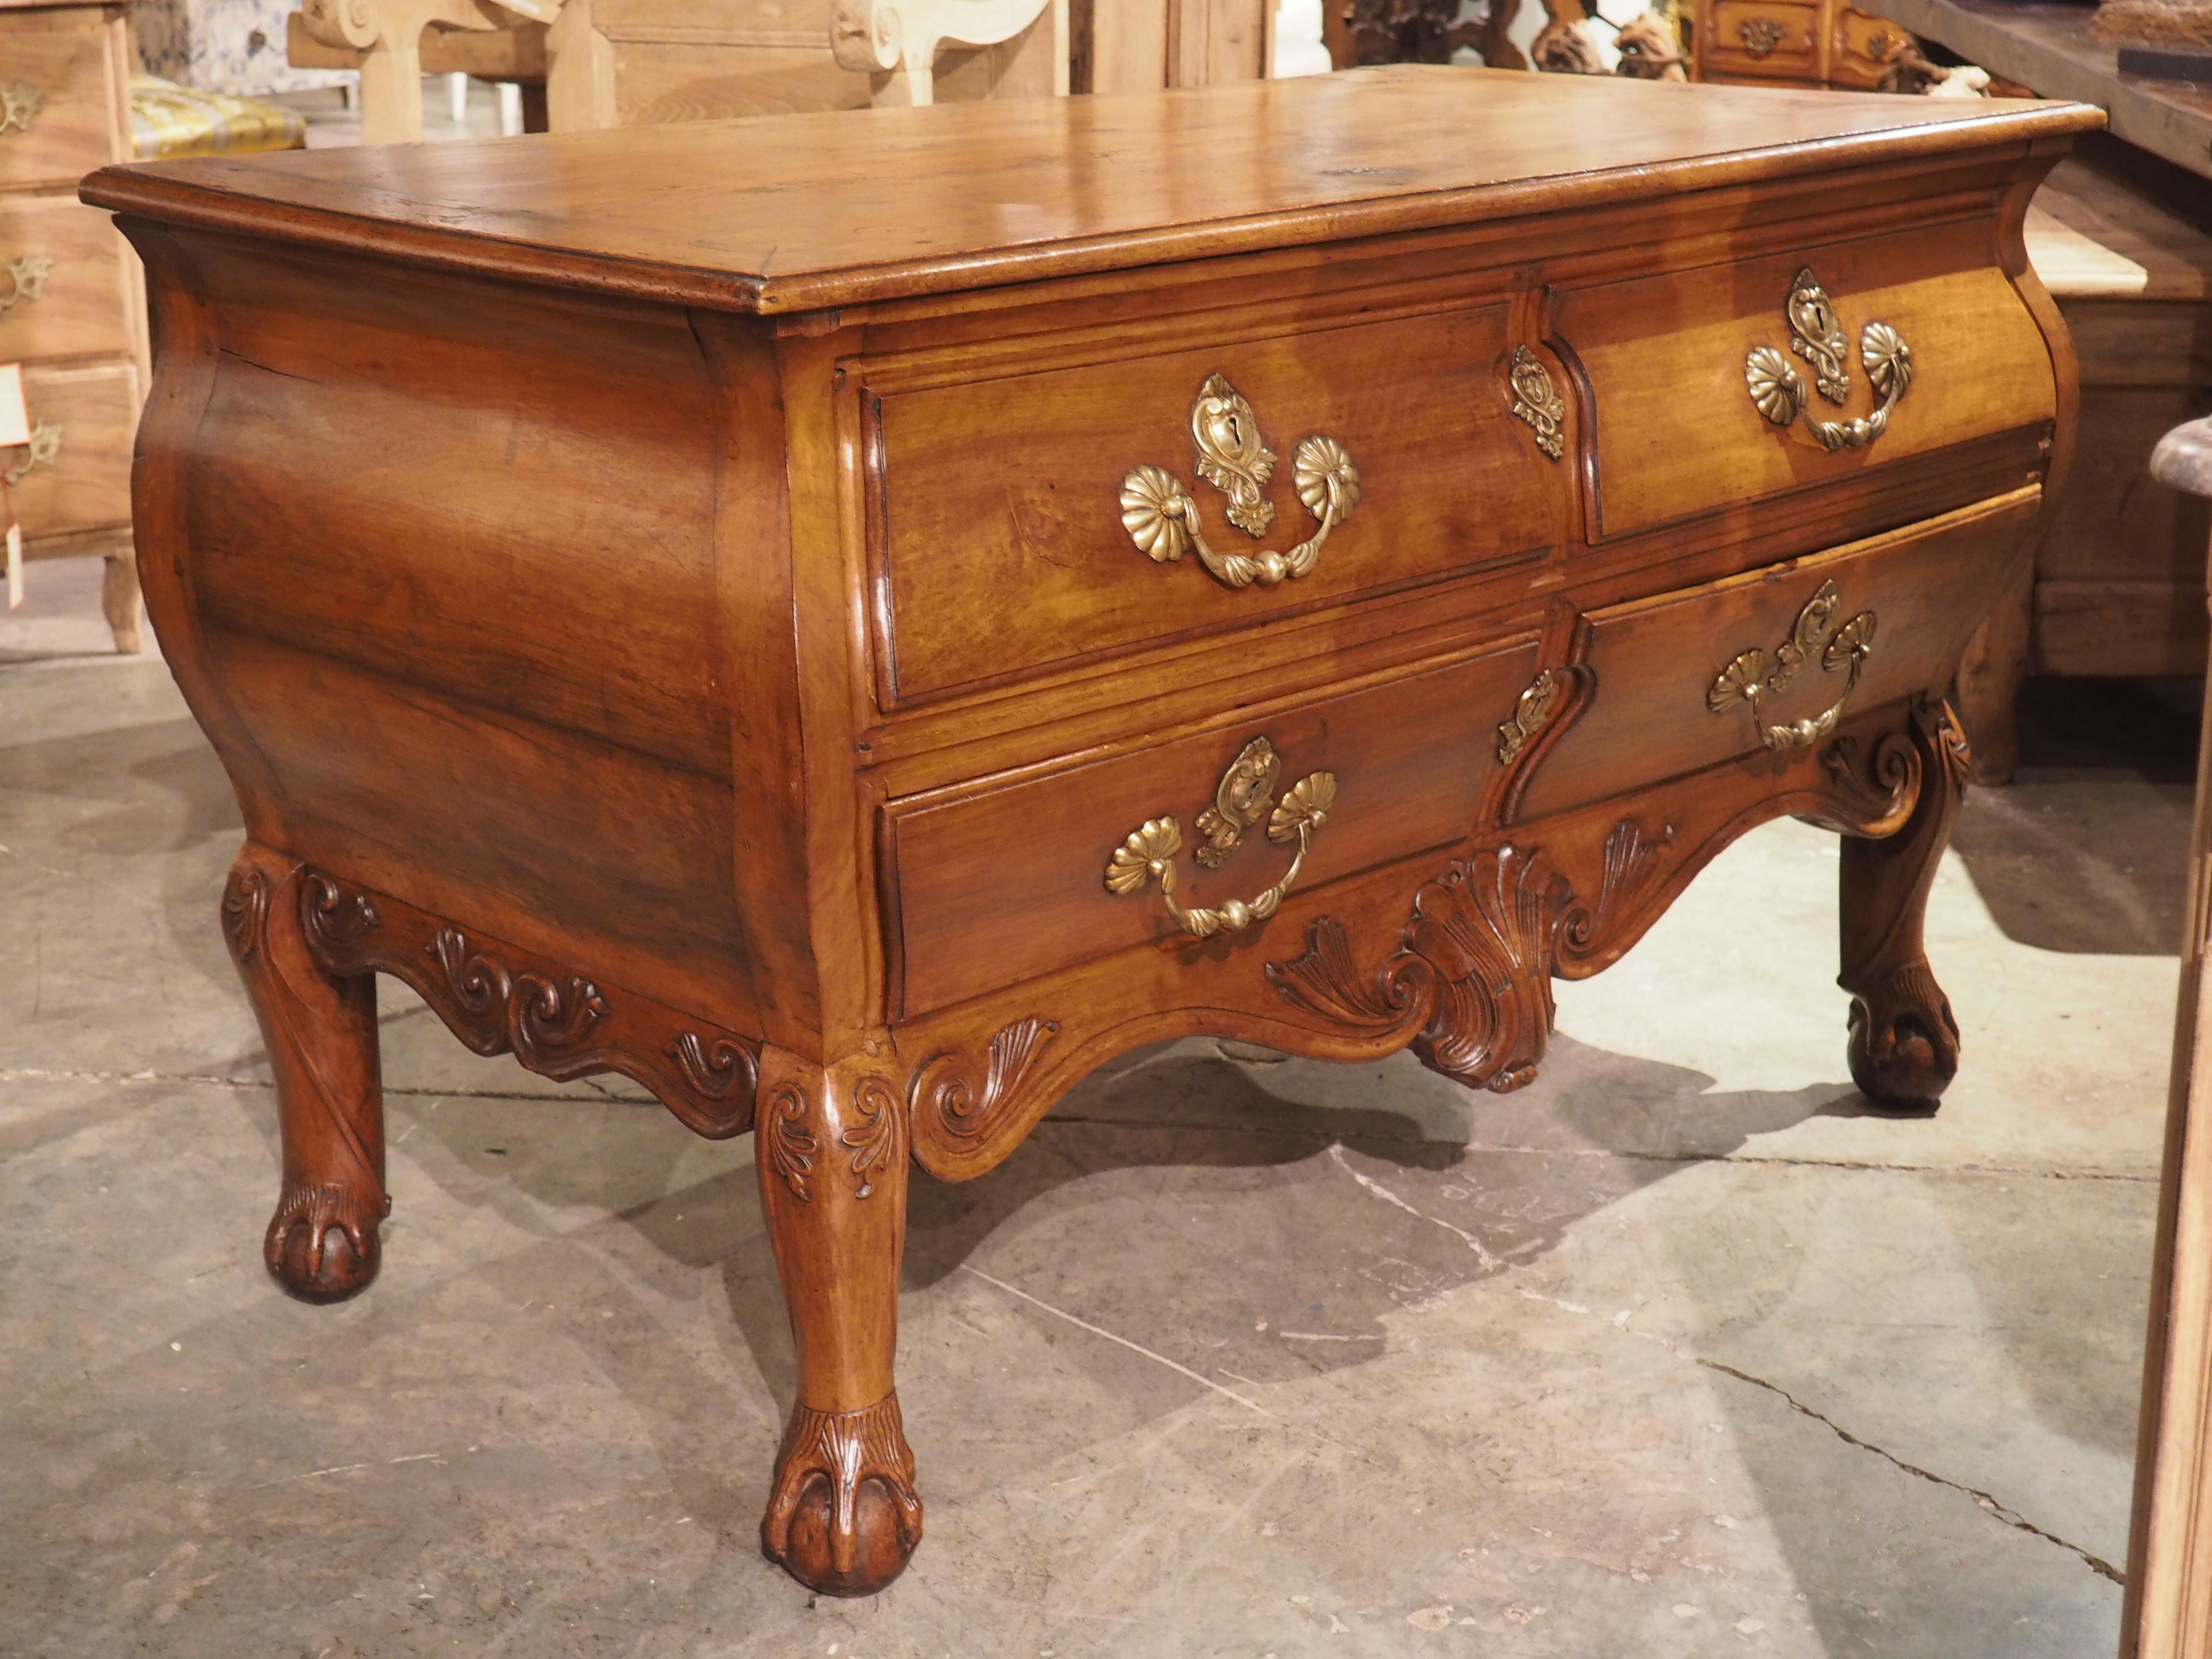 Rare 18th Century French Walnut Commode “Angouleme” with Stamped Bronze Hardware For Sale 9